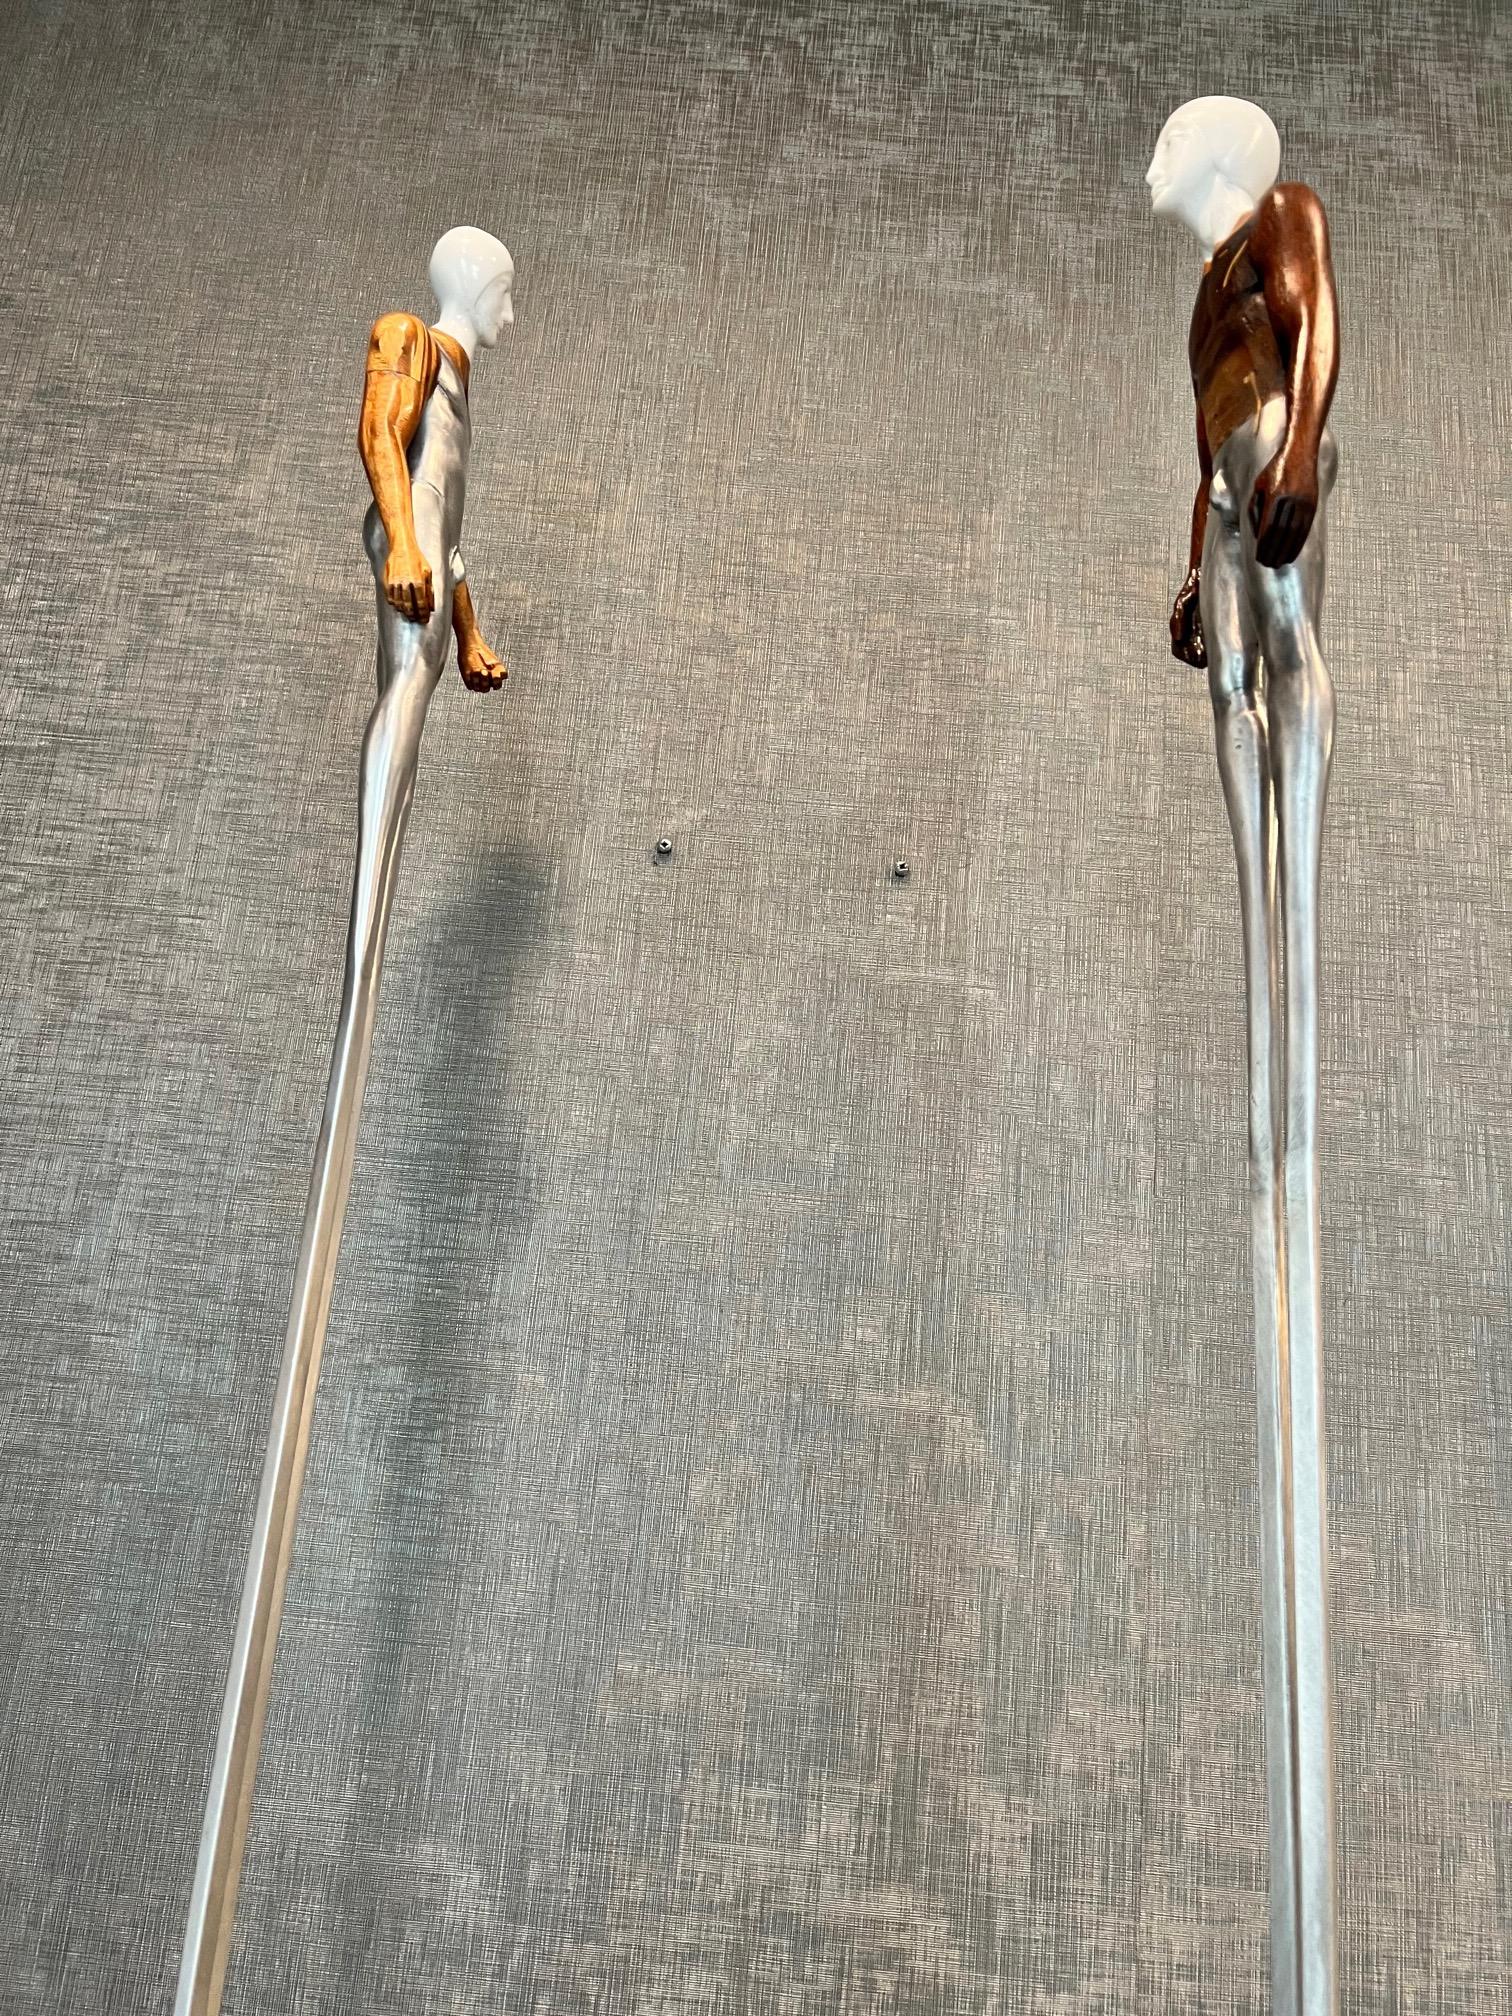 Carved Oriano Galloni Pair of Tall and Skinny Sculptures 